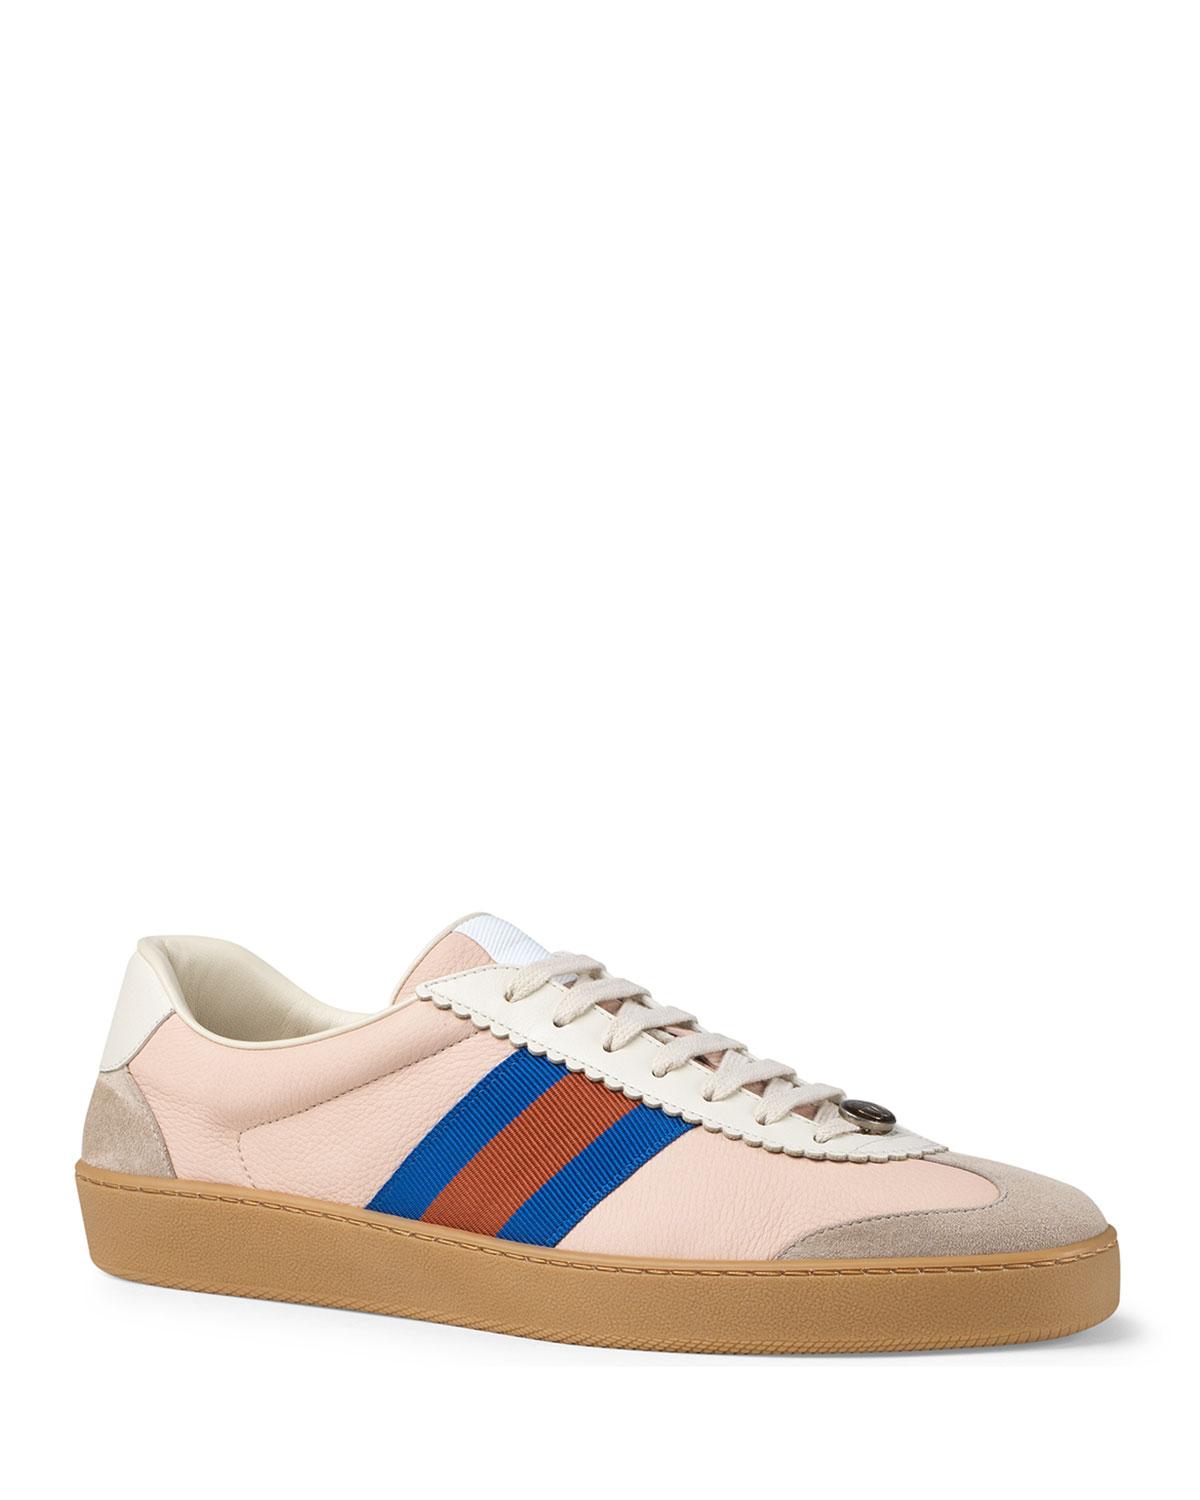 Gucci Leather And Suede Sneakers in 